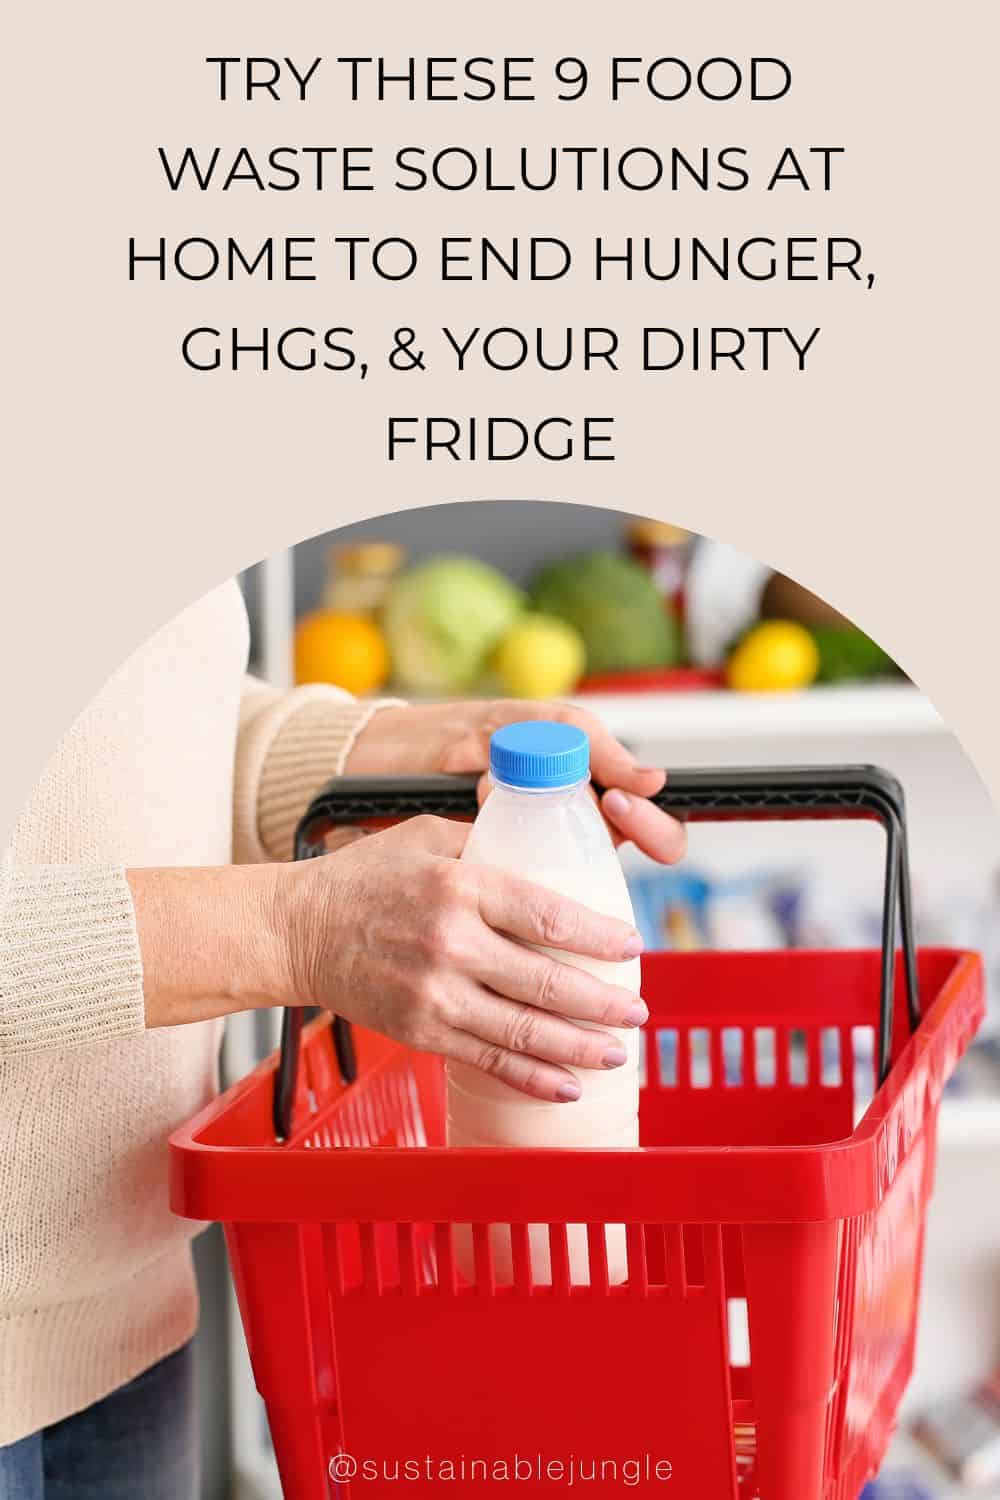 Try These 9 Food Waste Solutions At Home to End Hunger, GHGs, & Your Dirty Fridge Image by pixelshot #foodwastesolutions #foodwastesolutionsathome #solutionstofoodwaste #howtopreventfoodwasteathome #solutionsforfoodwaste #foodwastesolutionsathome #sustainablejungle